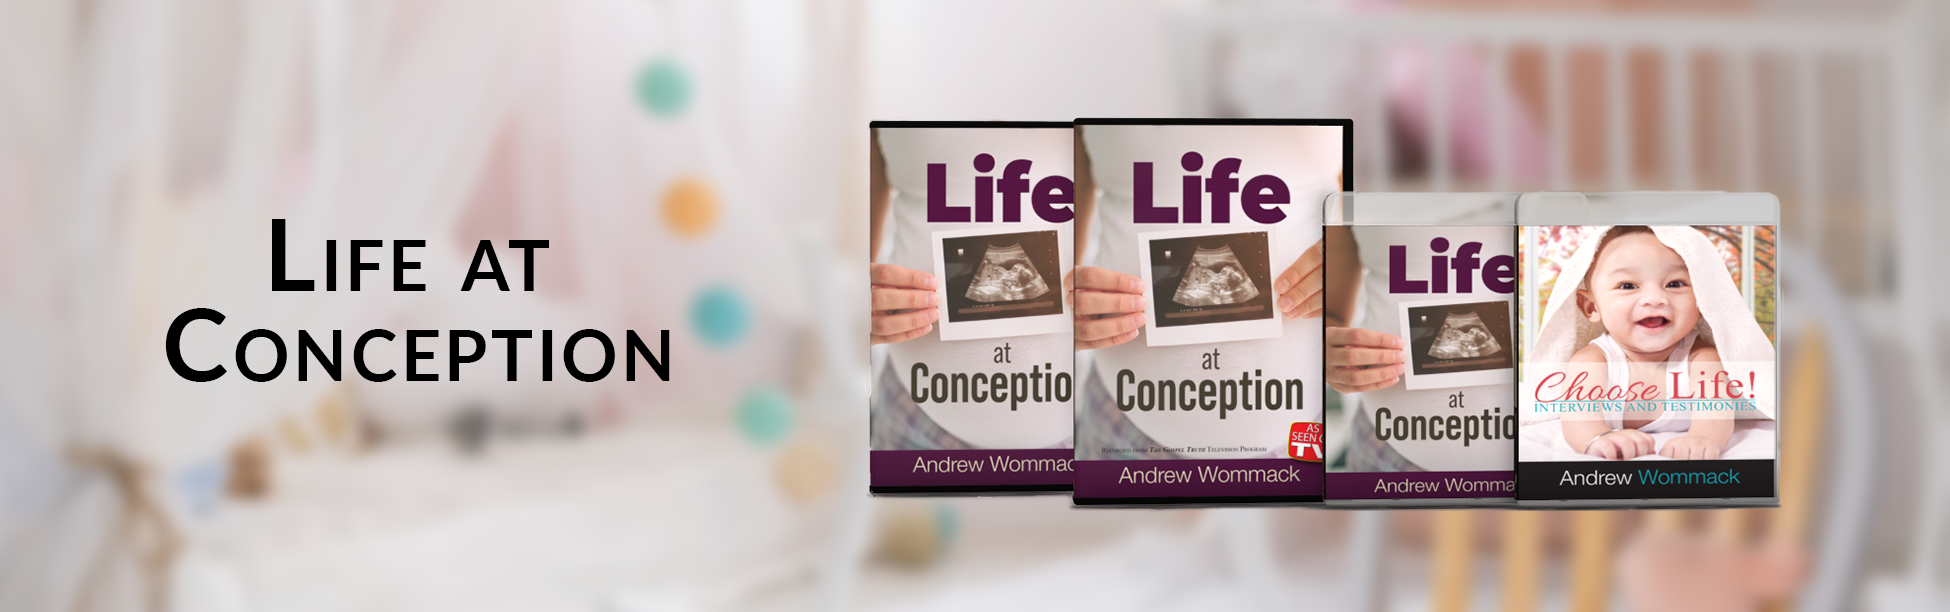 life_at_conception-aco_top_banner_1950x612-FINAL-20221227